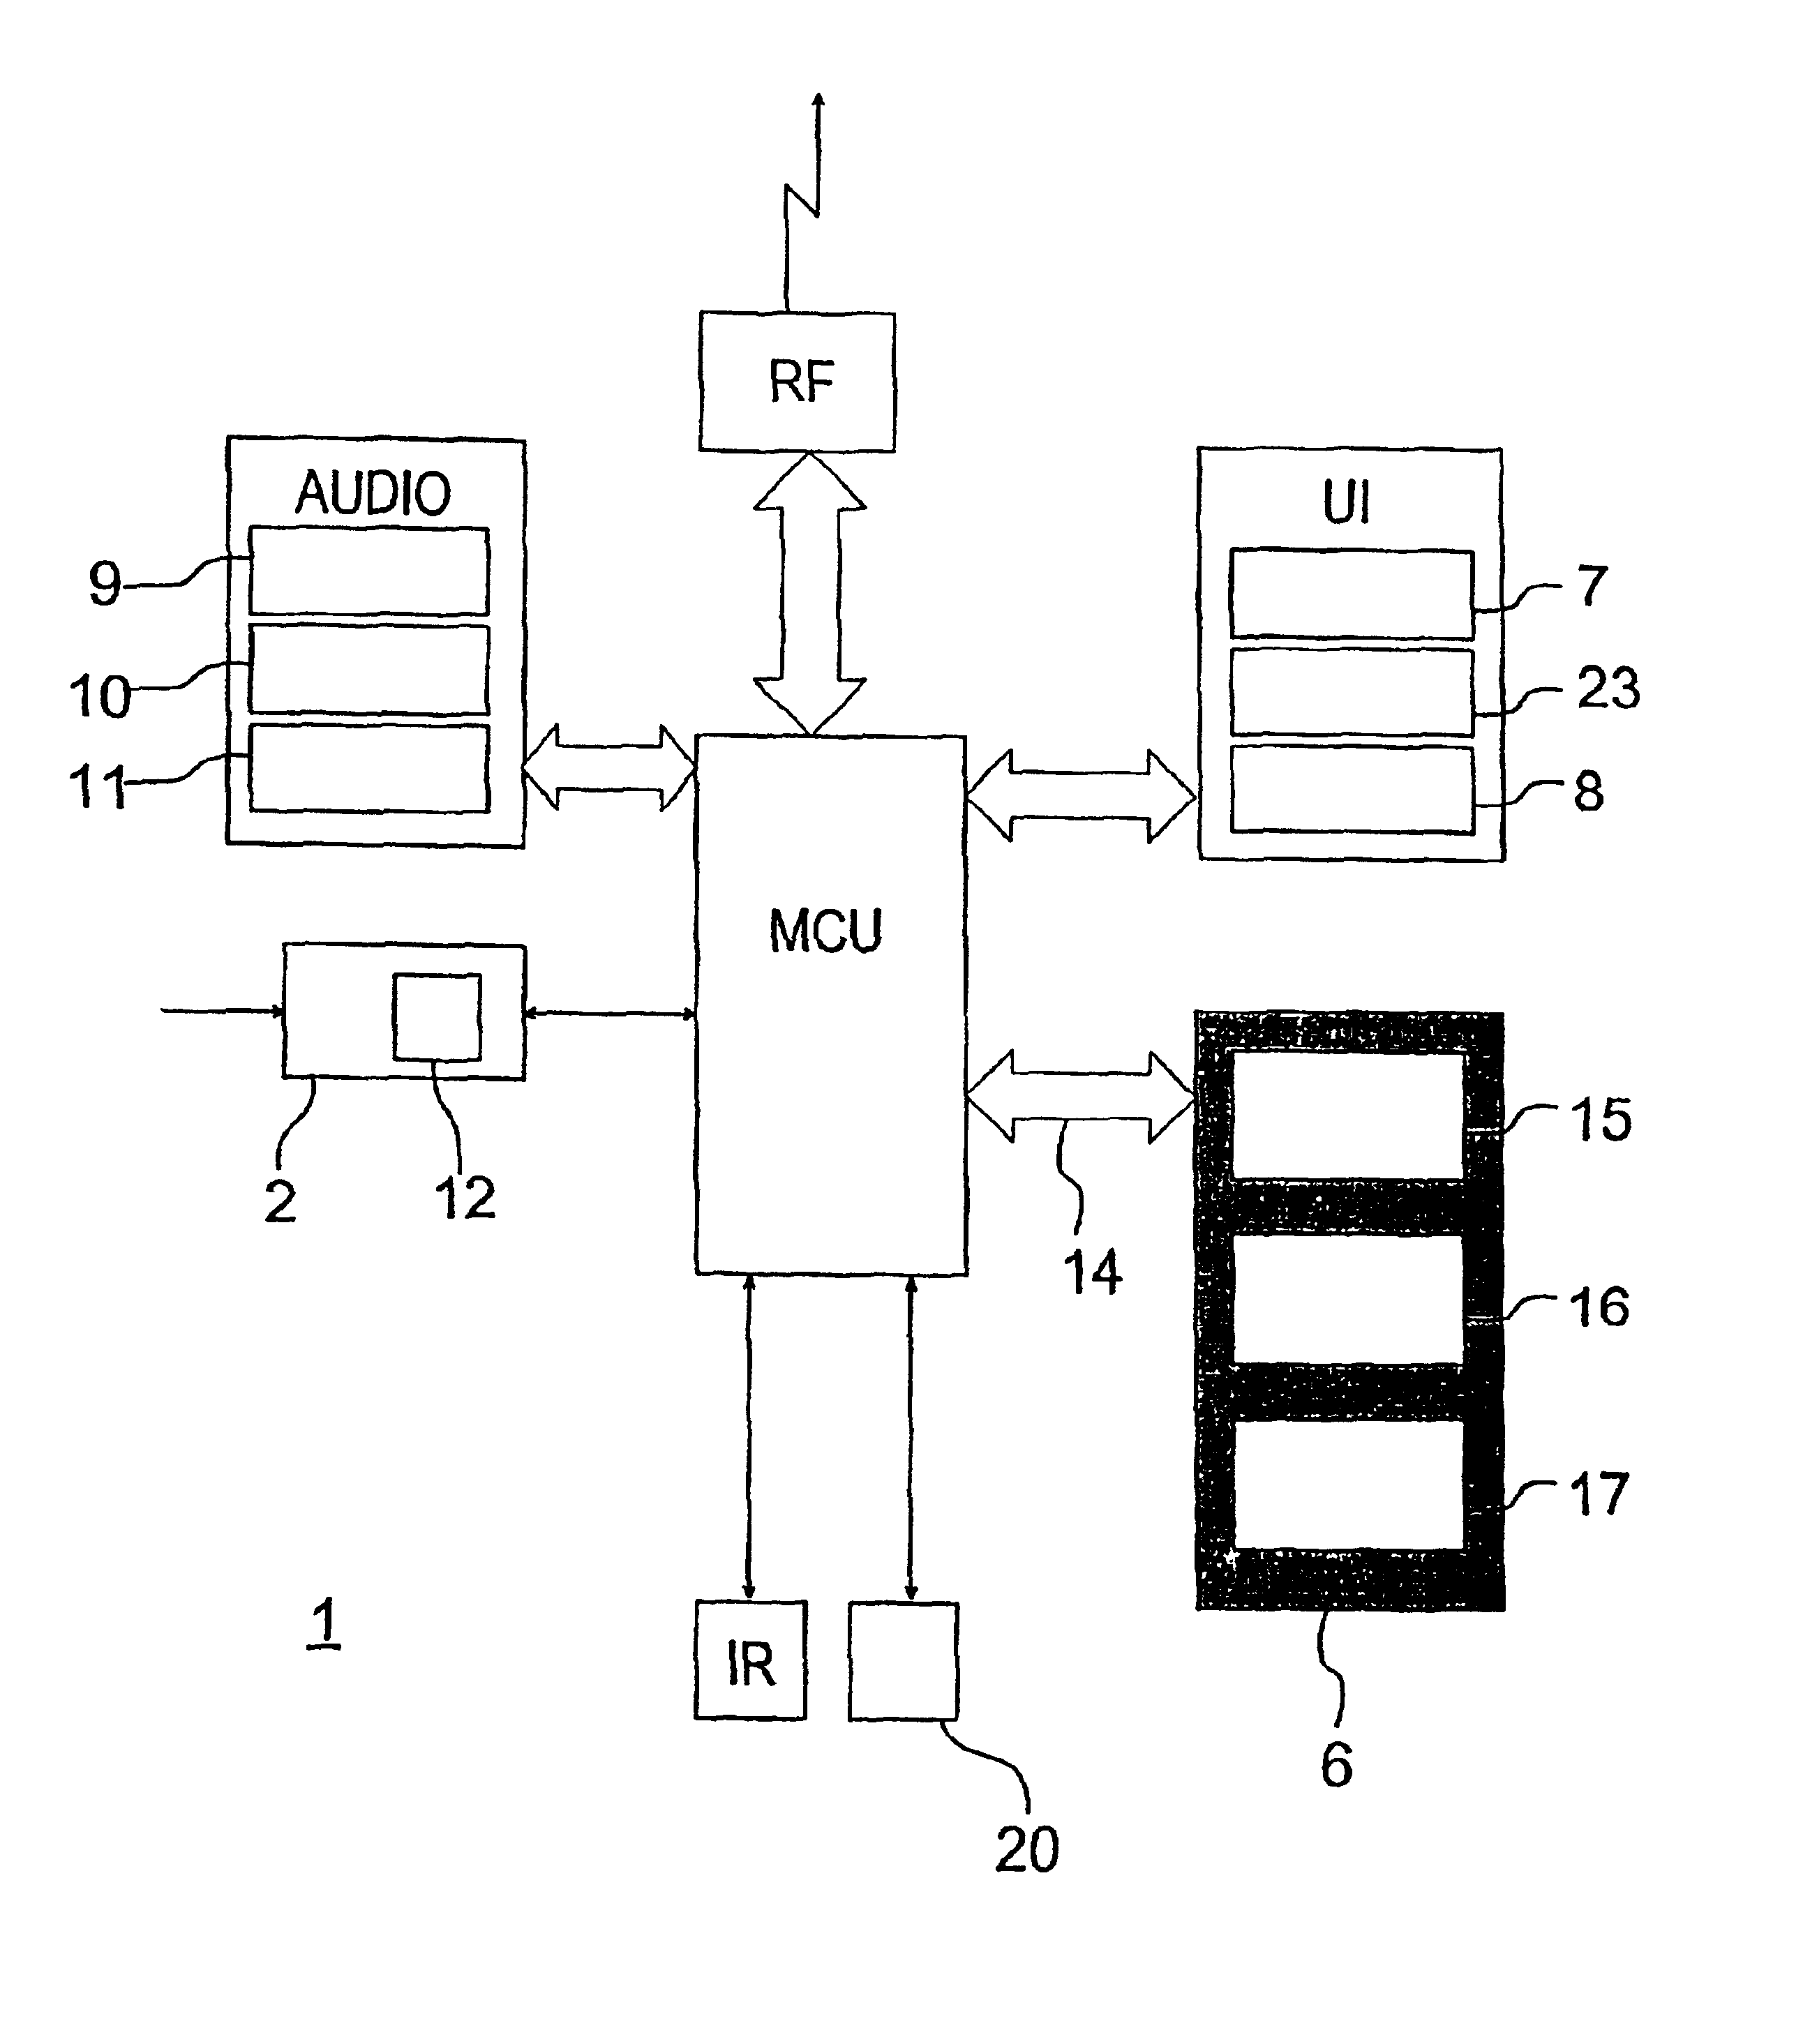 Method for using applications in a mobile station, a mobile station, and a system for effecting payments